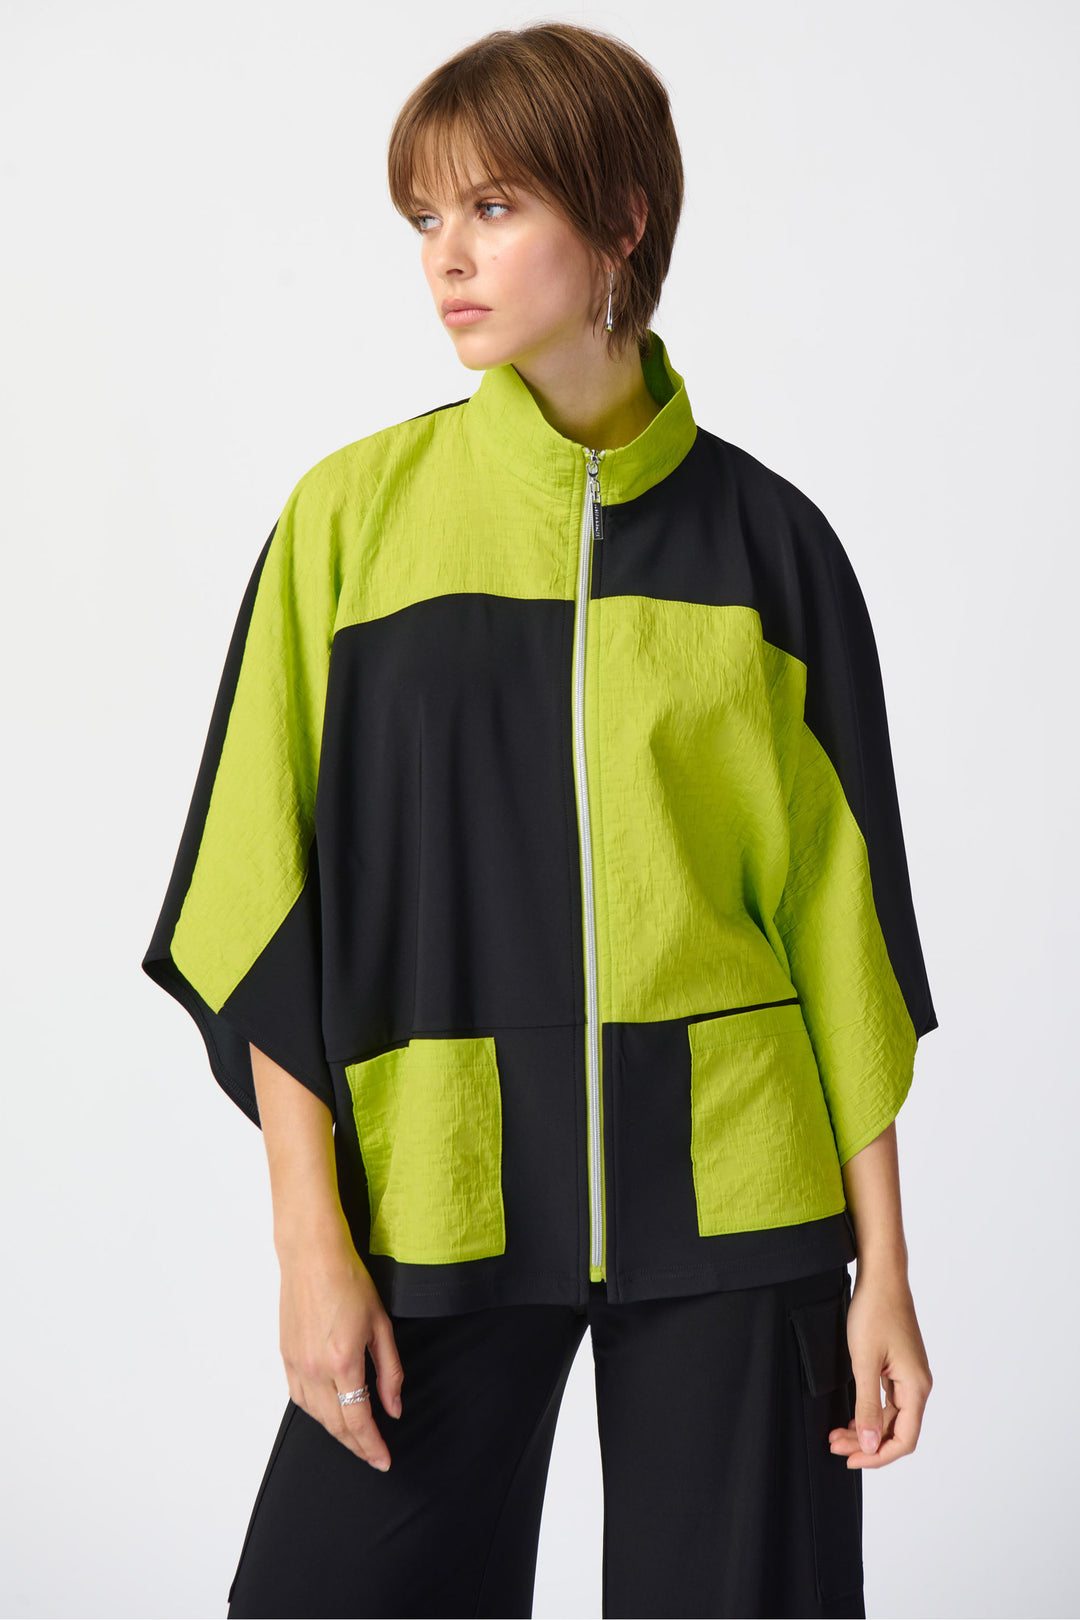 With its loose, jacket-style top and half sleeves, this jacket combines fashion and functionality.